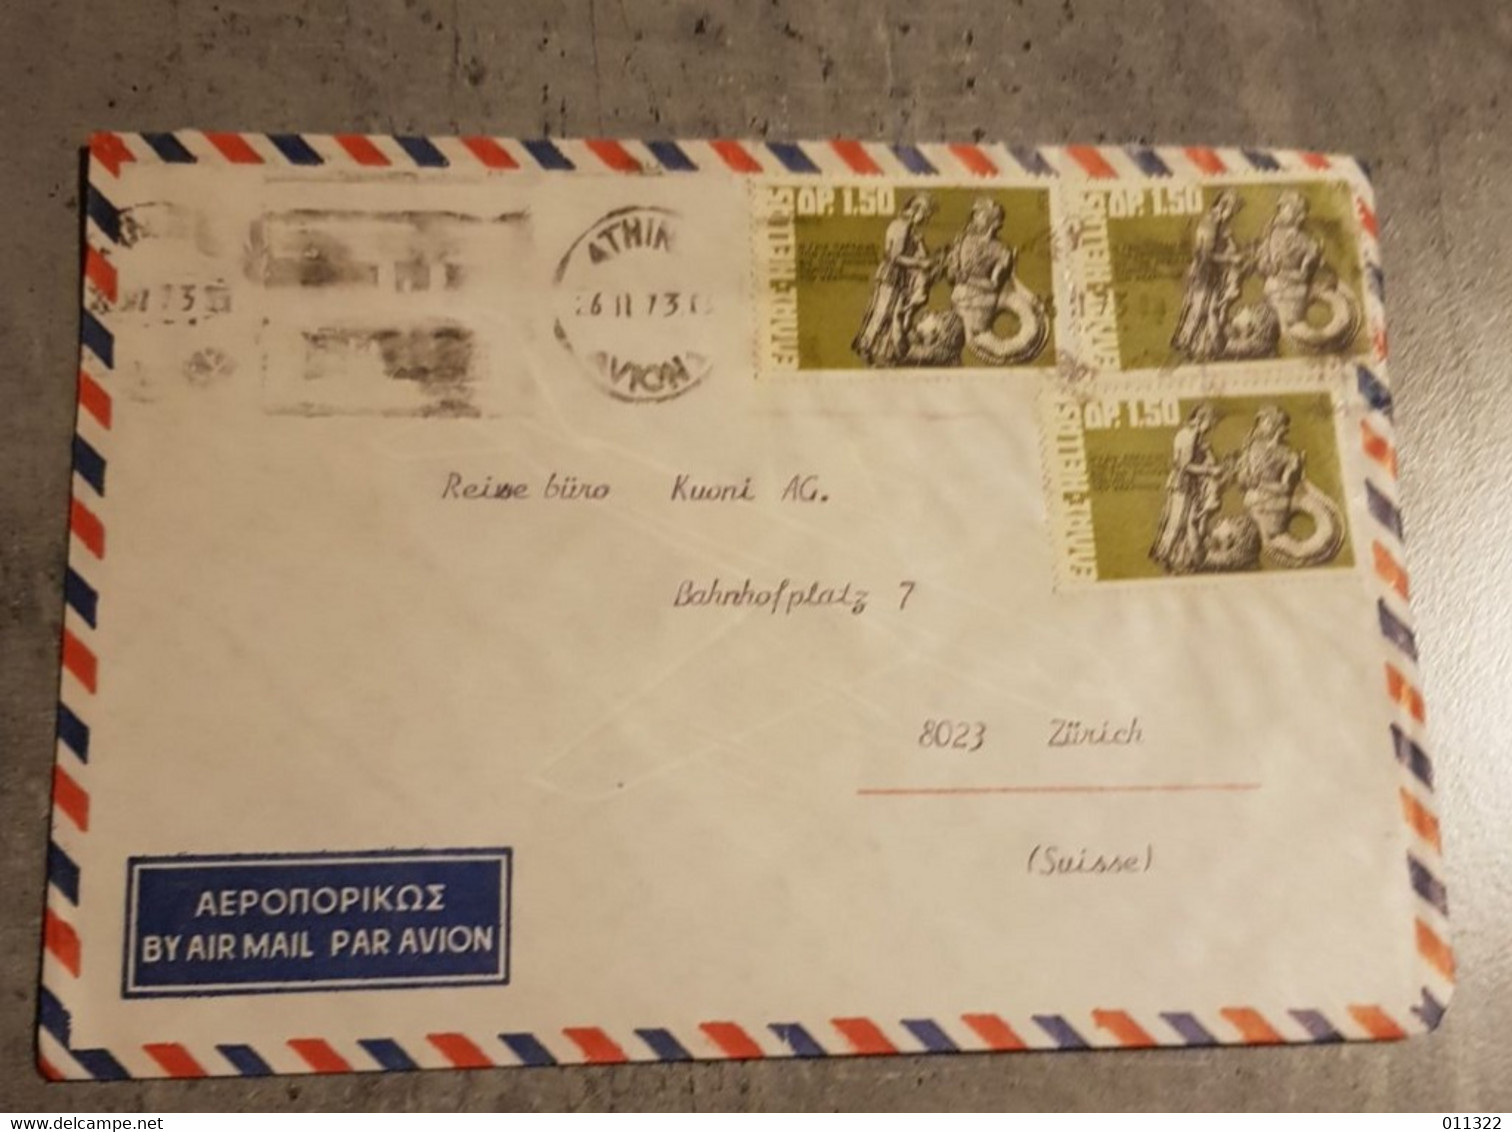 GREECE AIR MAIL LETTER ENVELOPPE CIRCULED SEND TO SUISSE - Covers & Documents